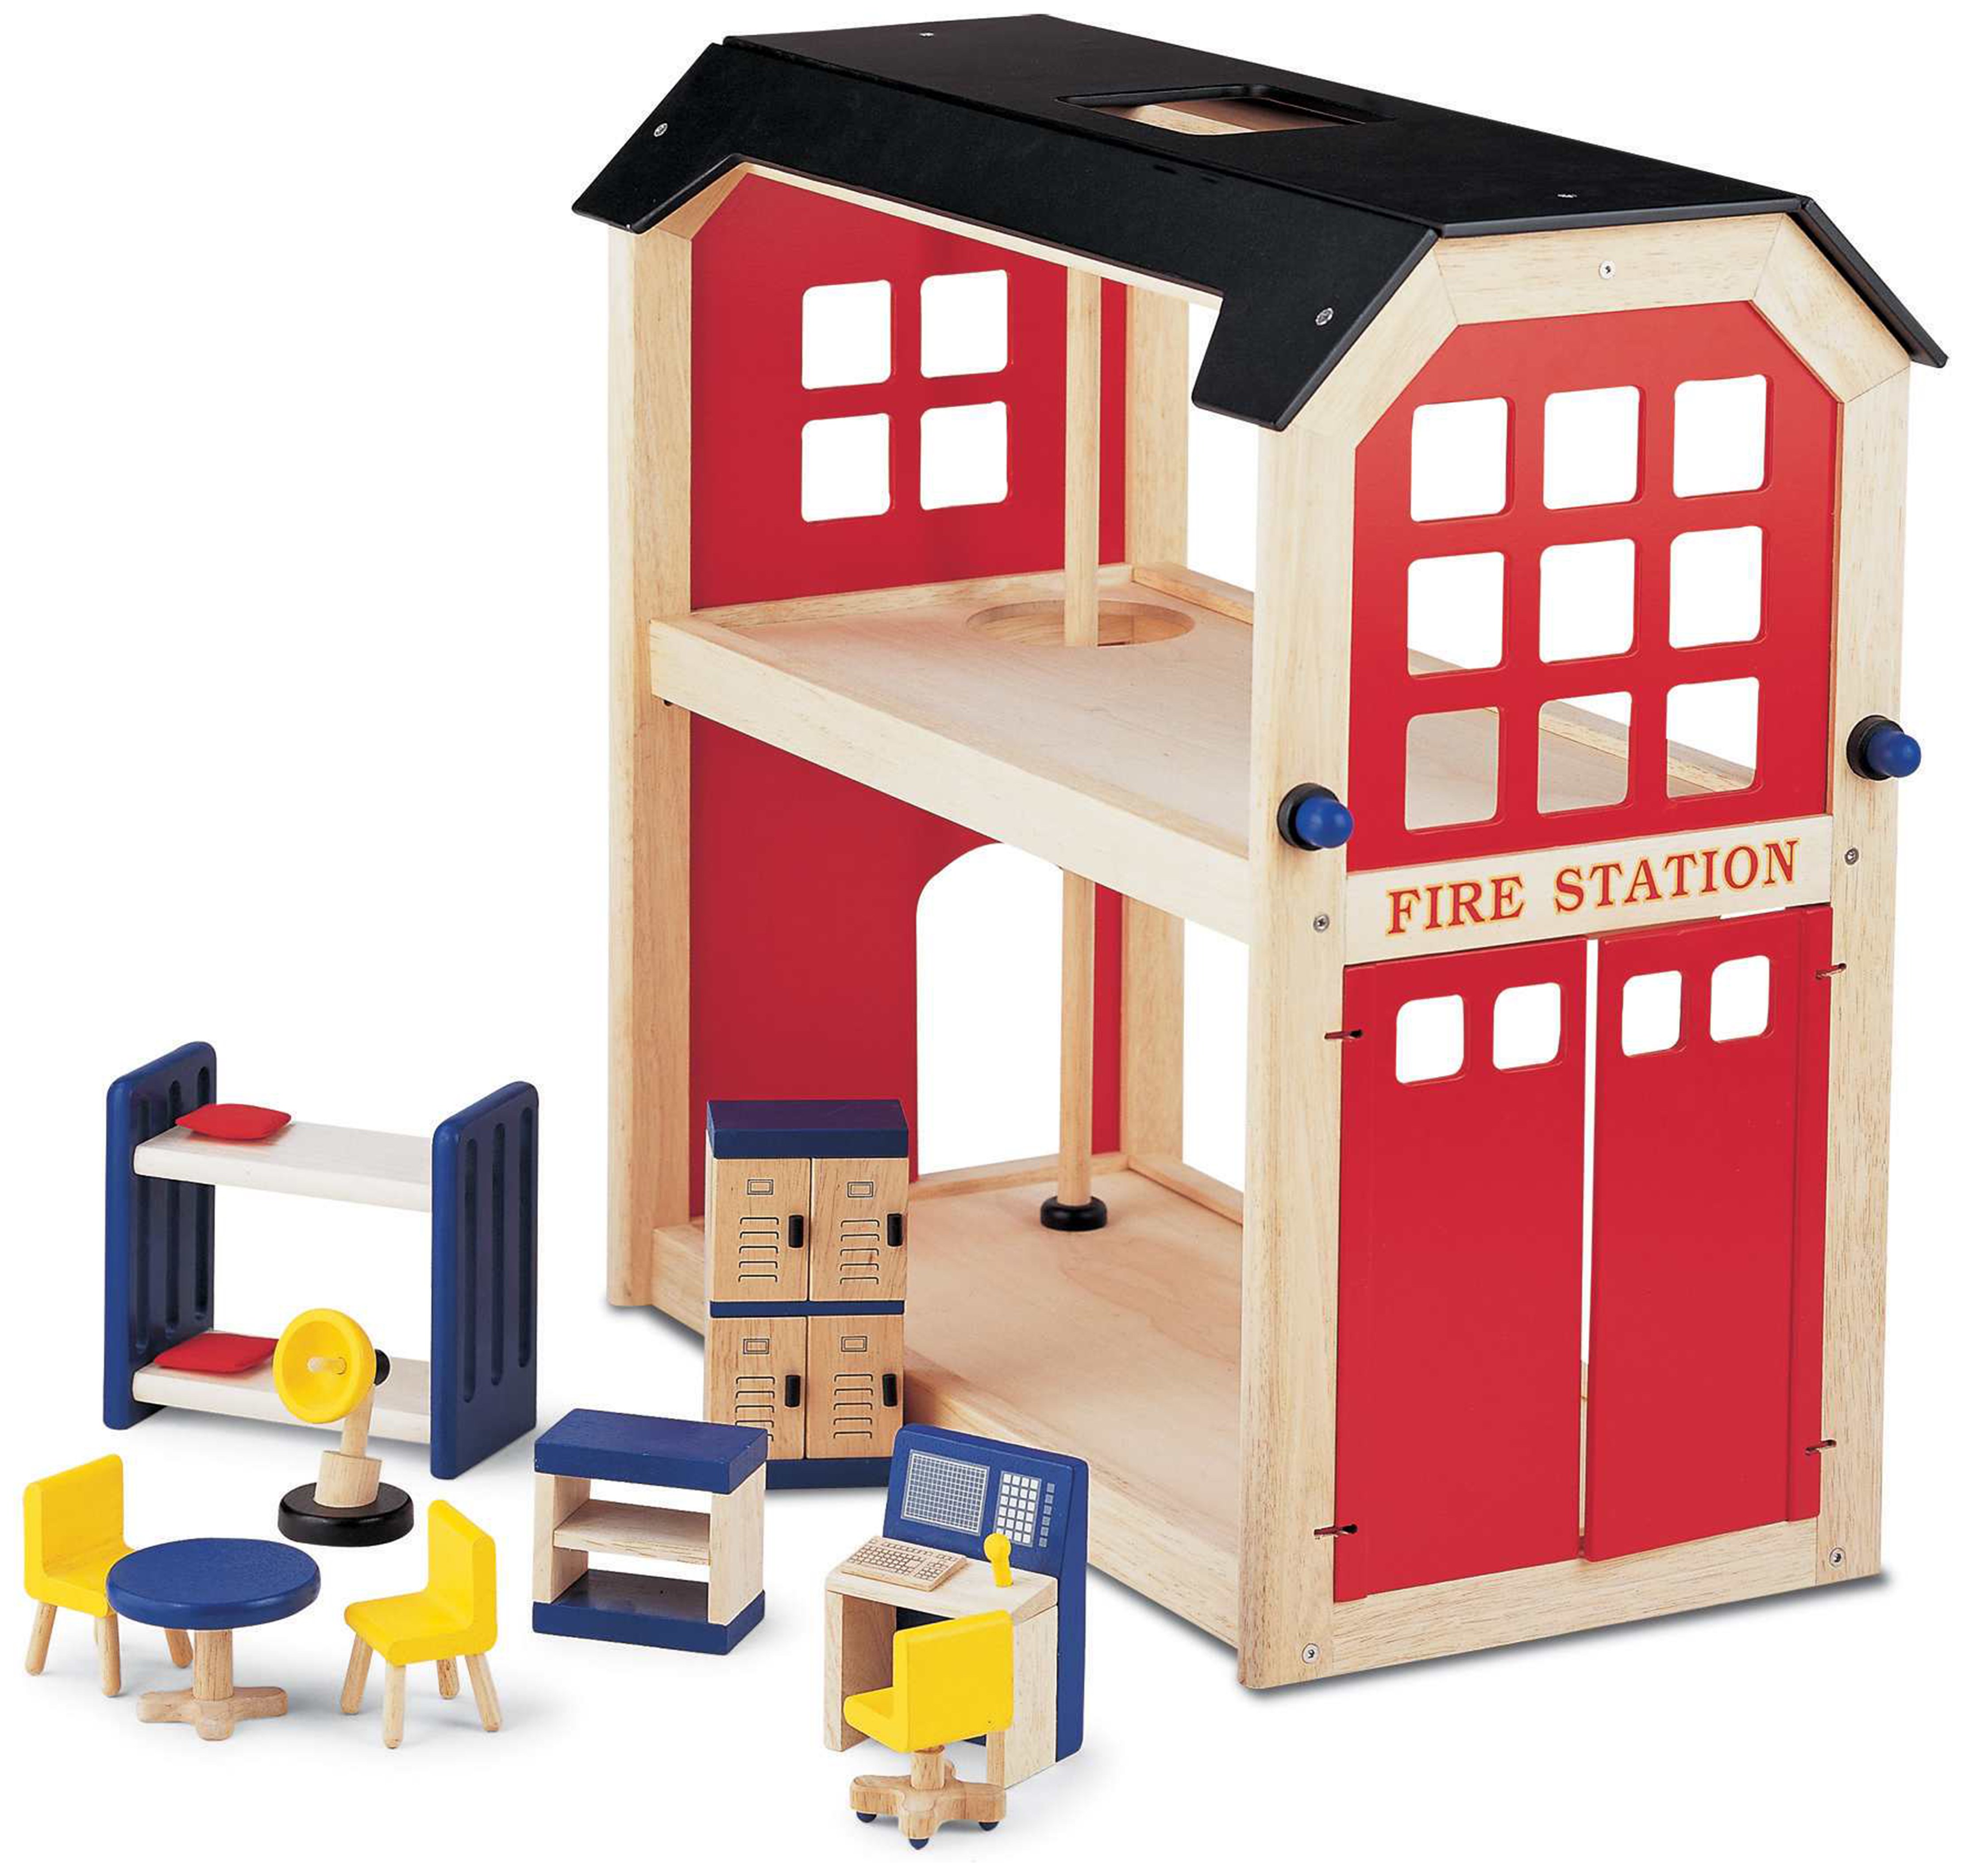 Pintoy Fire Station Playset